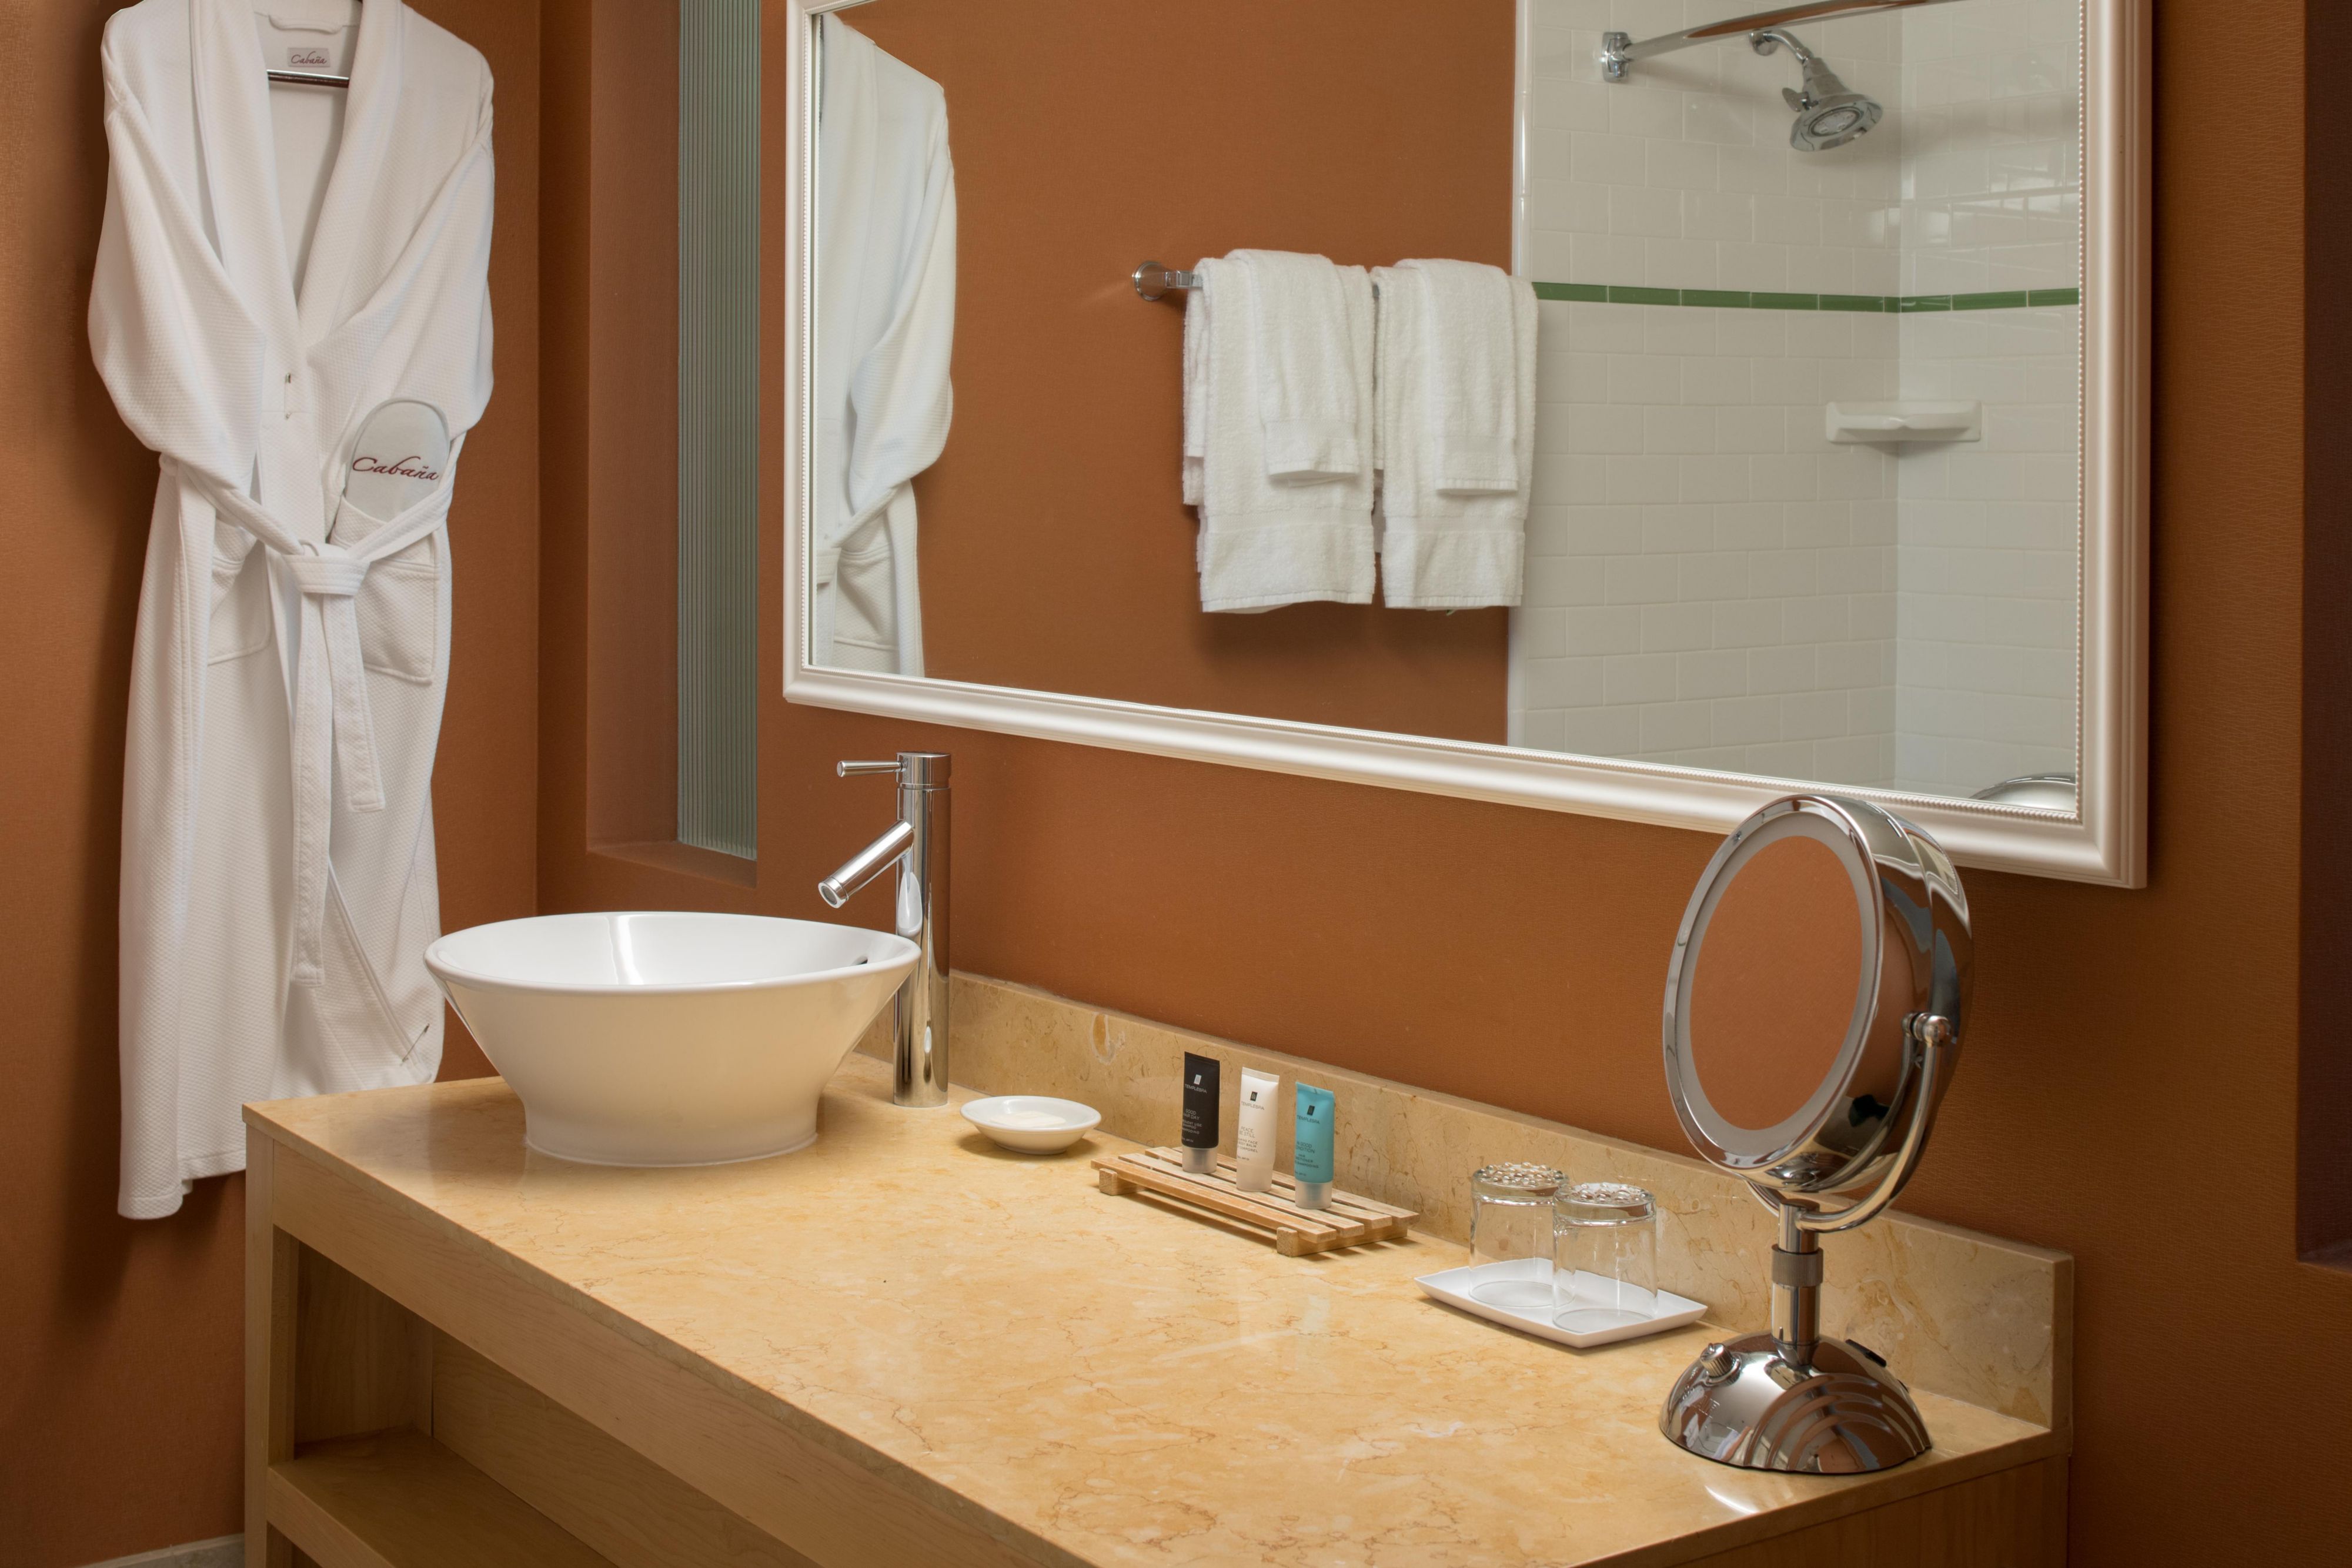 Prepare to soak up the sun in our Poolside Guest Room Bathrooms